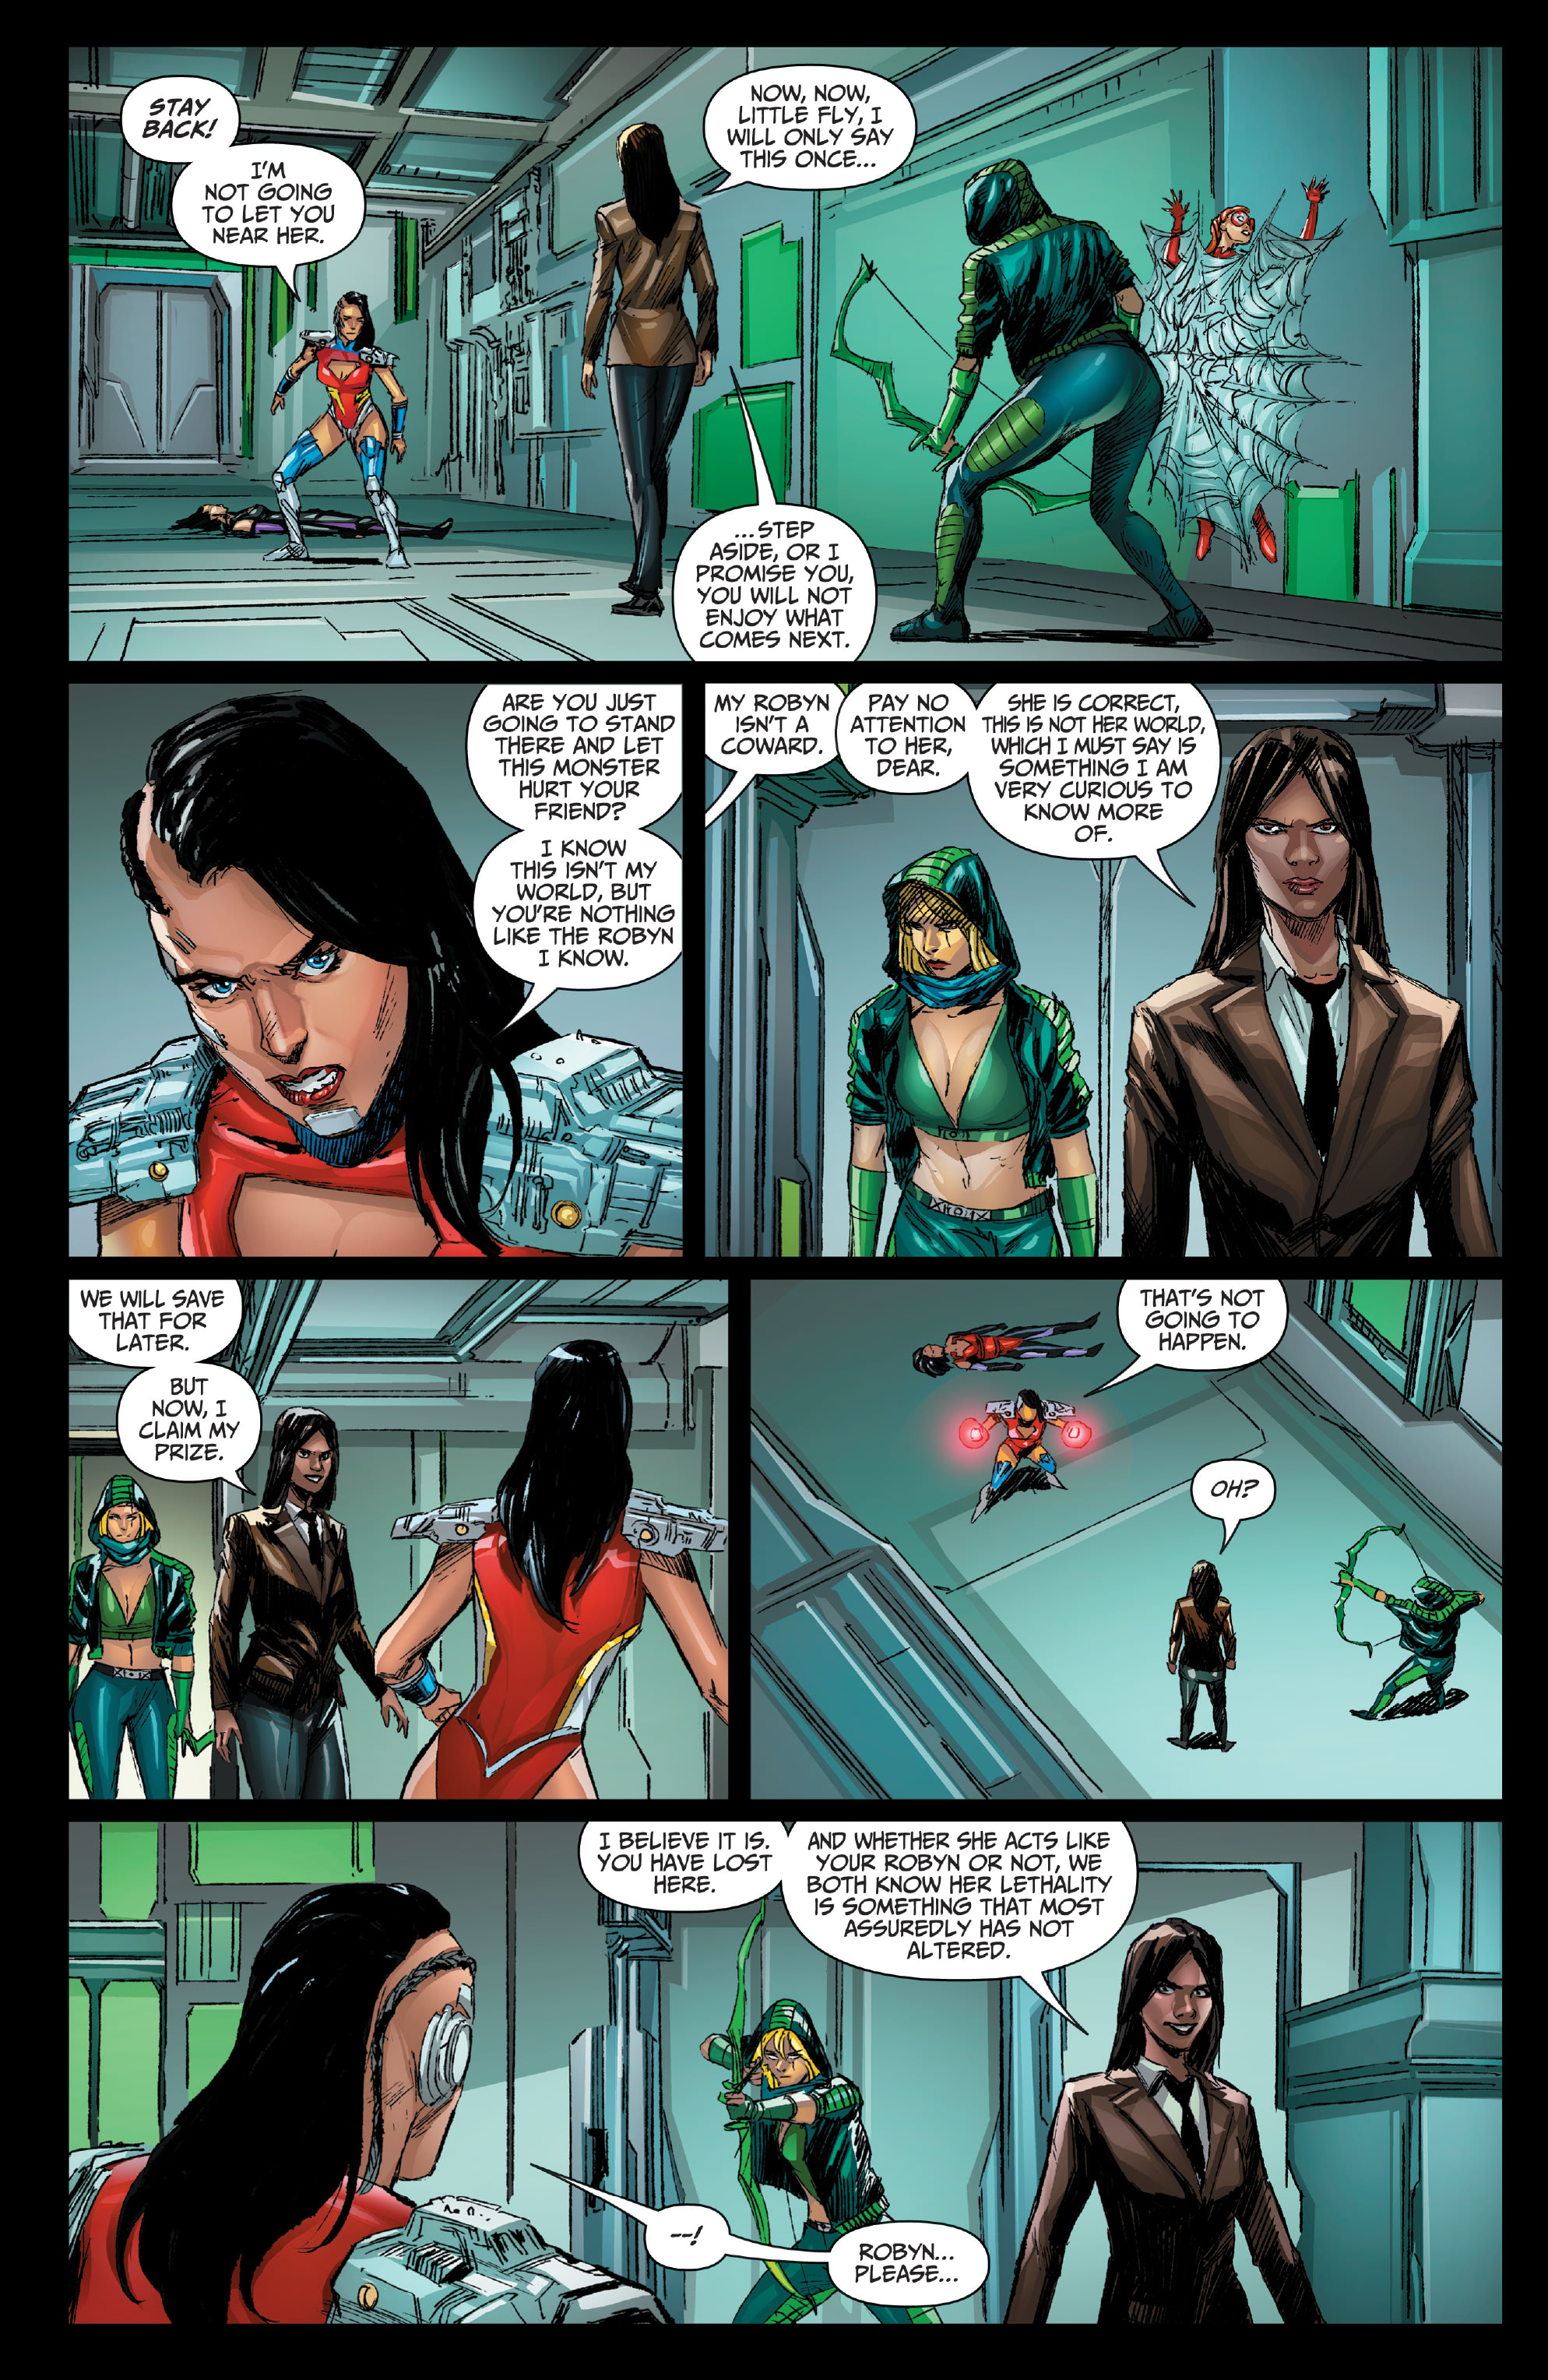 Grimm Fairy Tales (2016-): Chapter 54 - Page 4